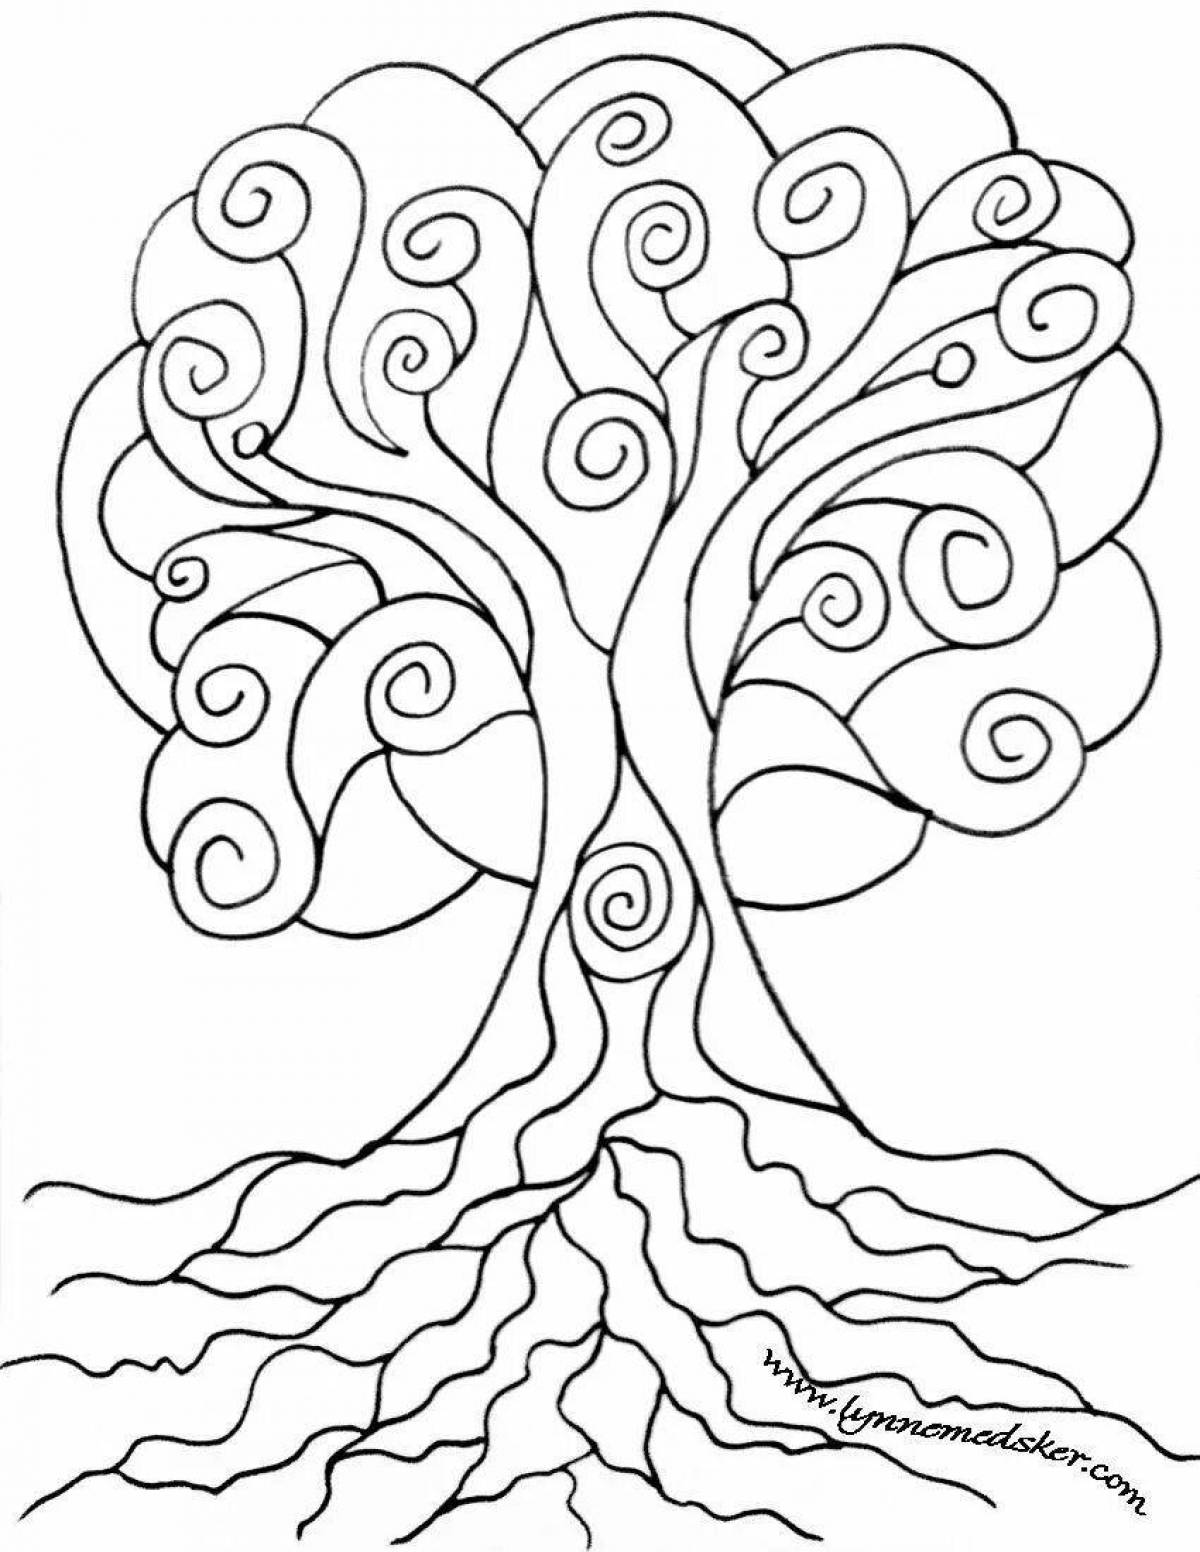 Coloring book bright tree of life